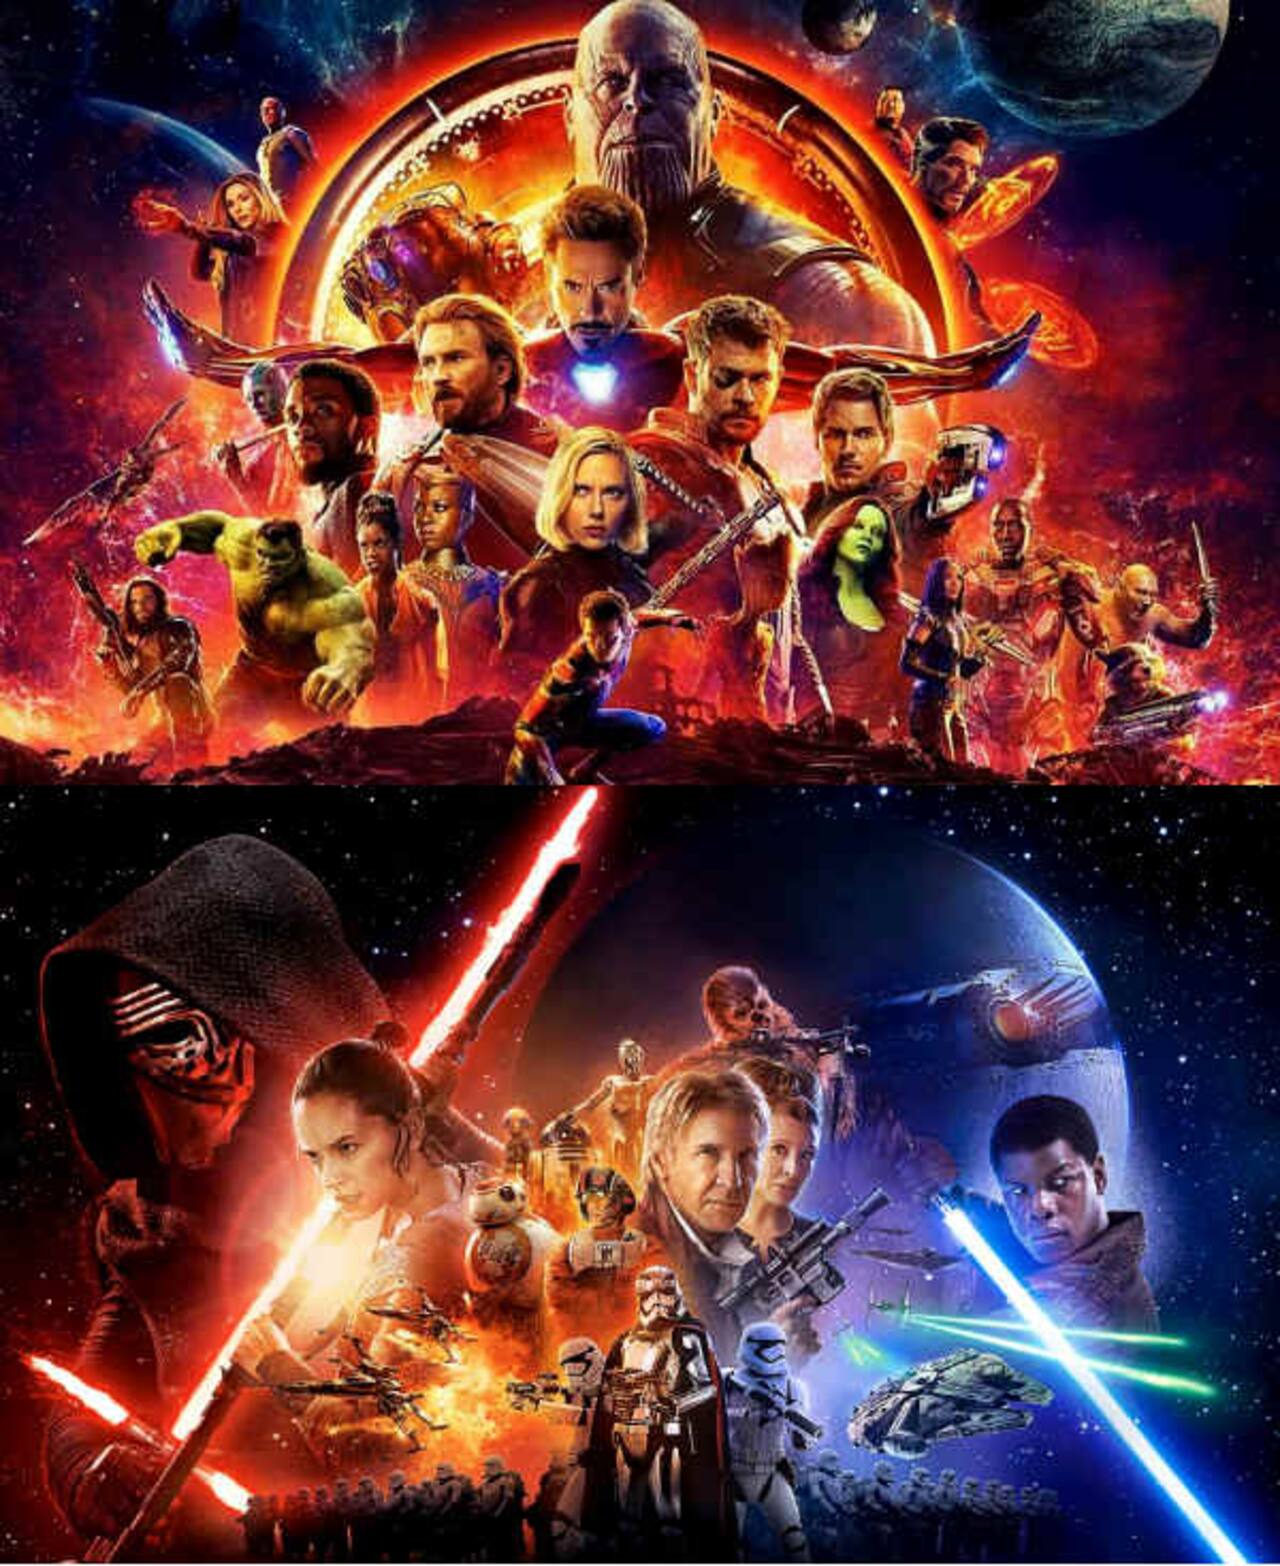 Avengers Infinity War box office prediction: The film set to take a $250  million opening in America; will beat Star Wars: The Force Awakens -  Bollywood News & Gossip, Movie Reviews, Trailers